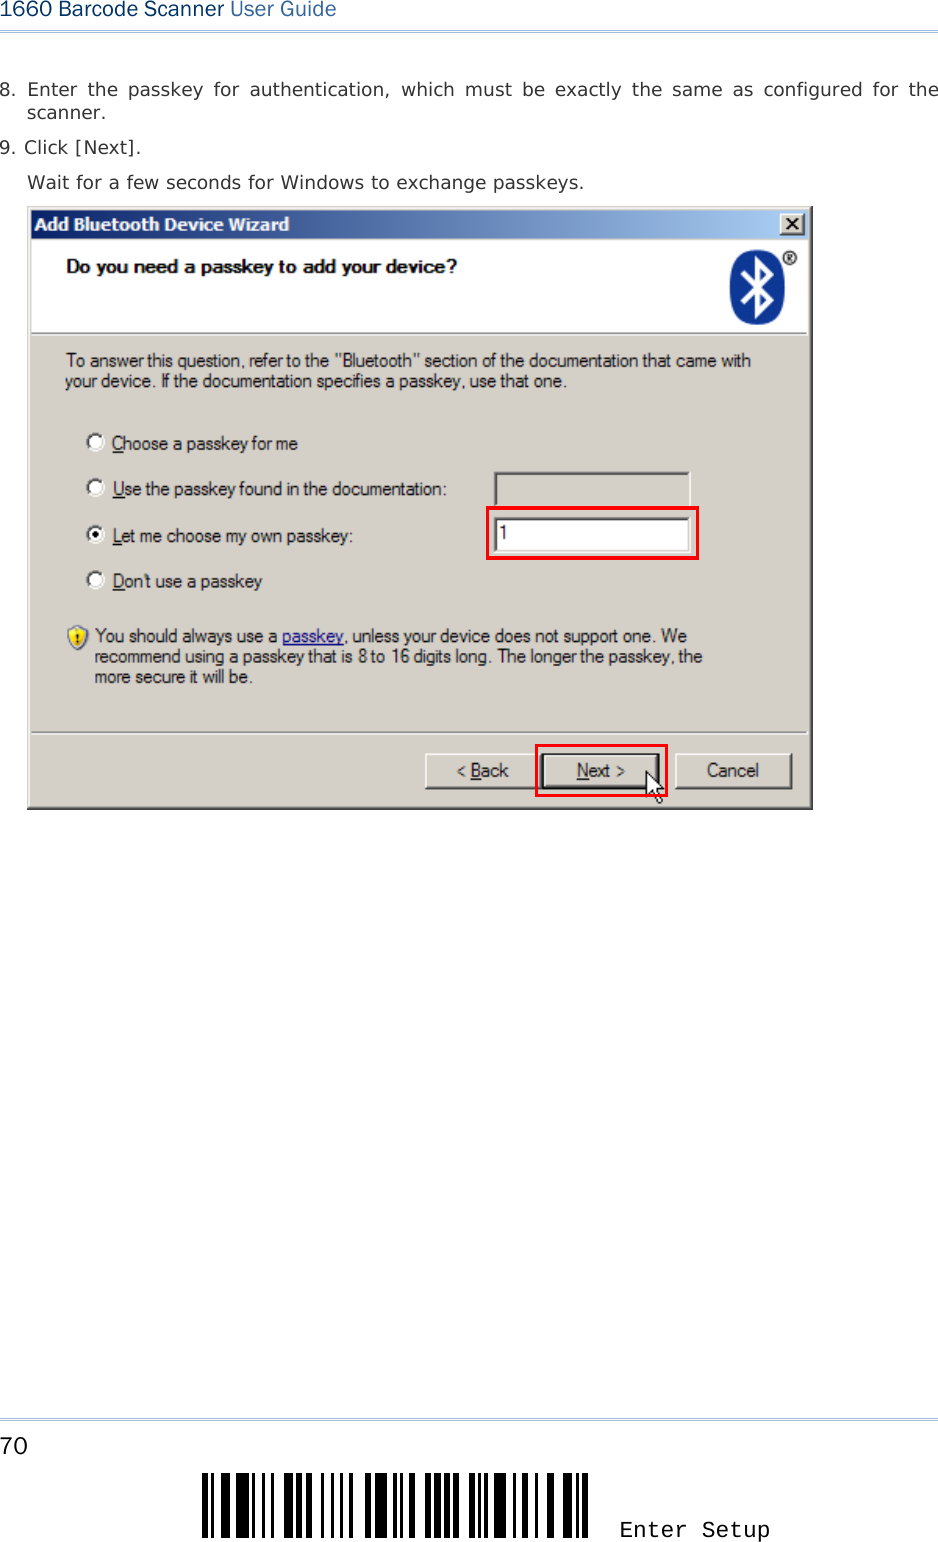 70 Enter Setup 1660 Barcode Scanner User Guide  8. Enter the passkey for authentication, which must be exactly the same as configured for the scanner. 9. Click [Next].  Wait for a few seconds for Windows to exchange passkeys.                         